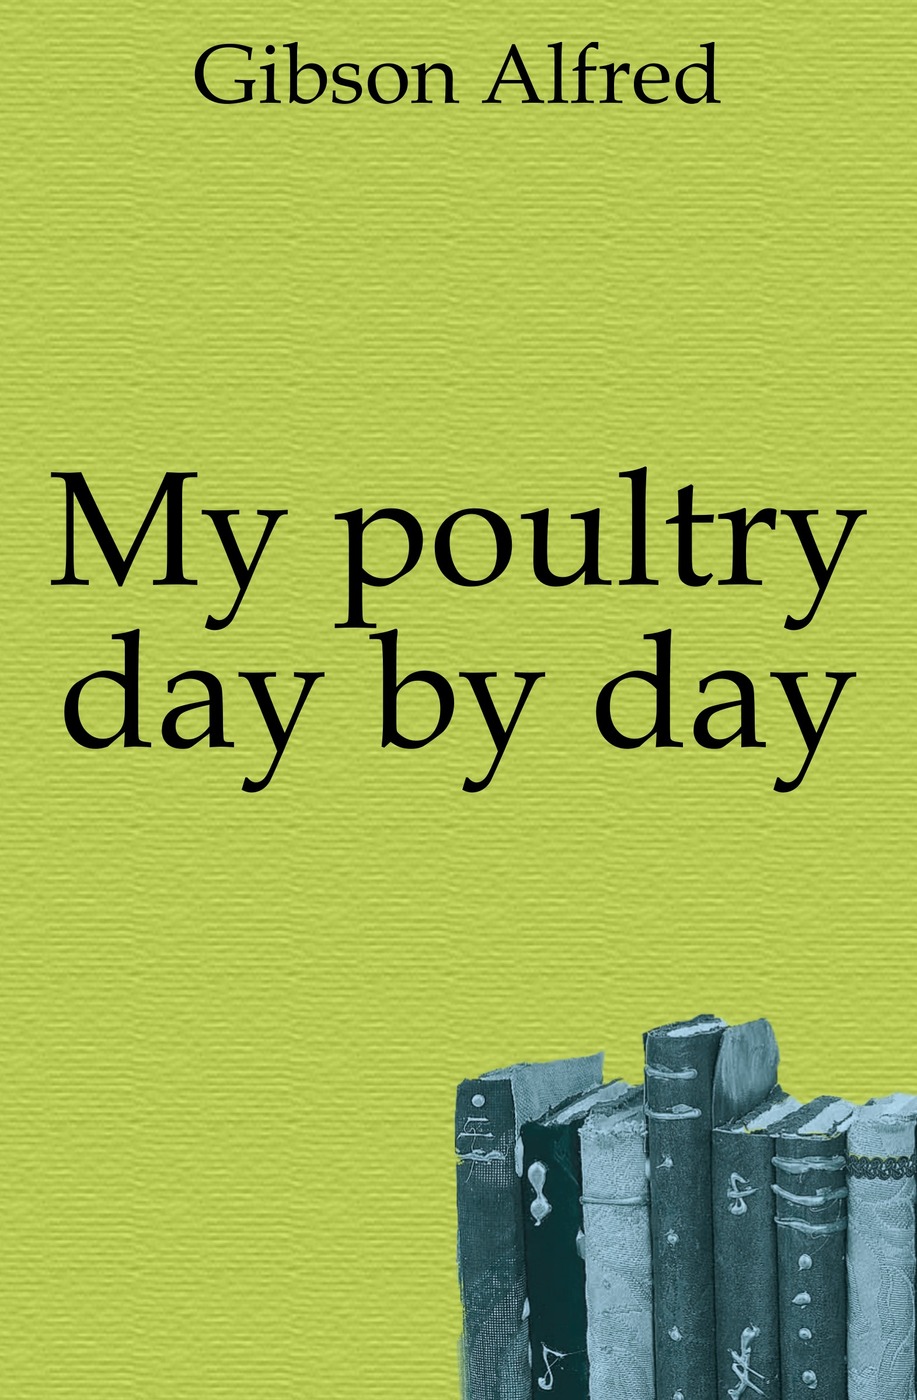 My poultry day by day